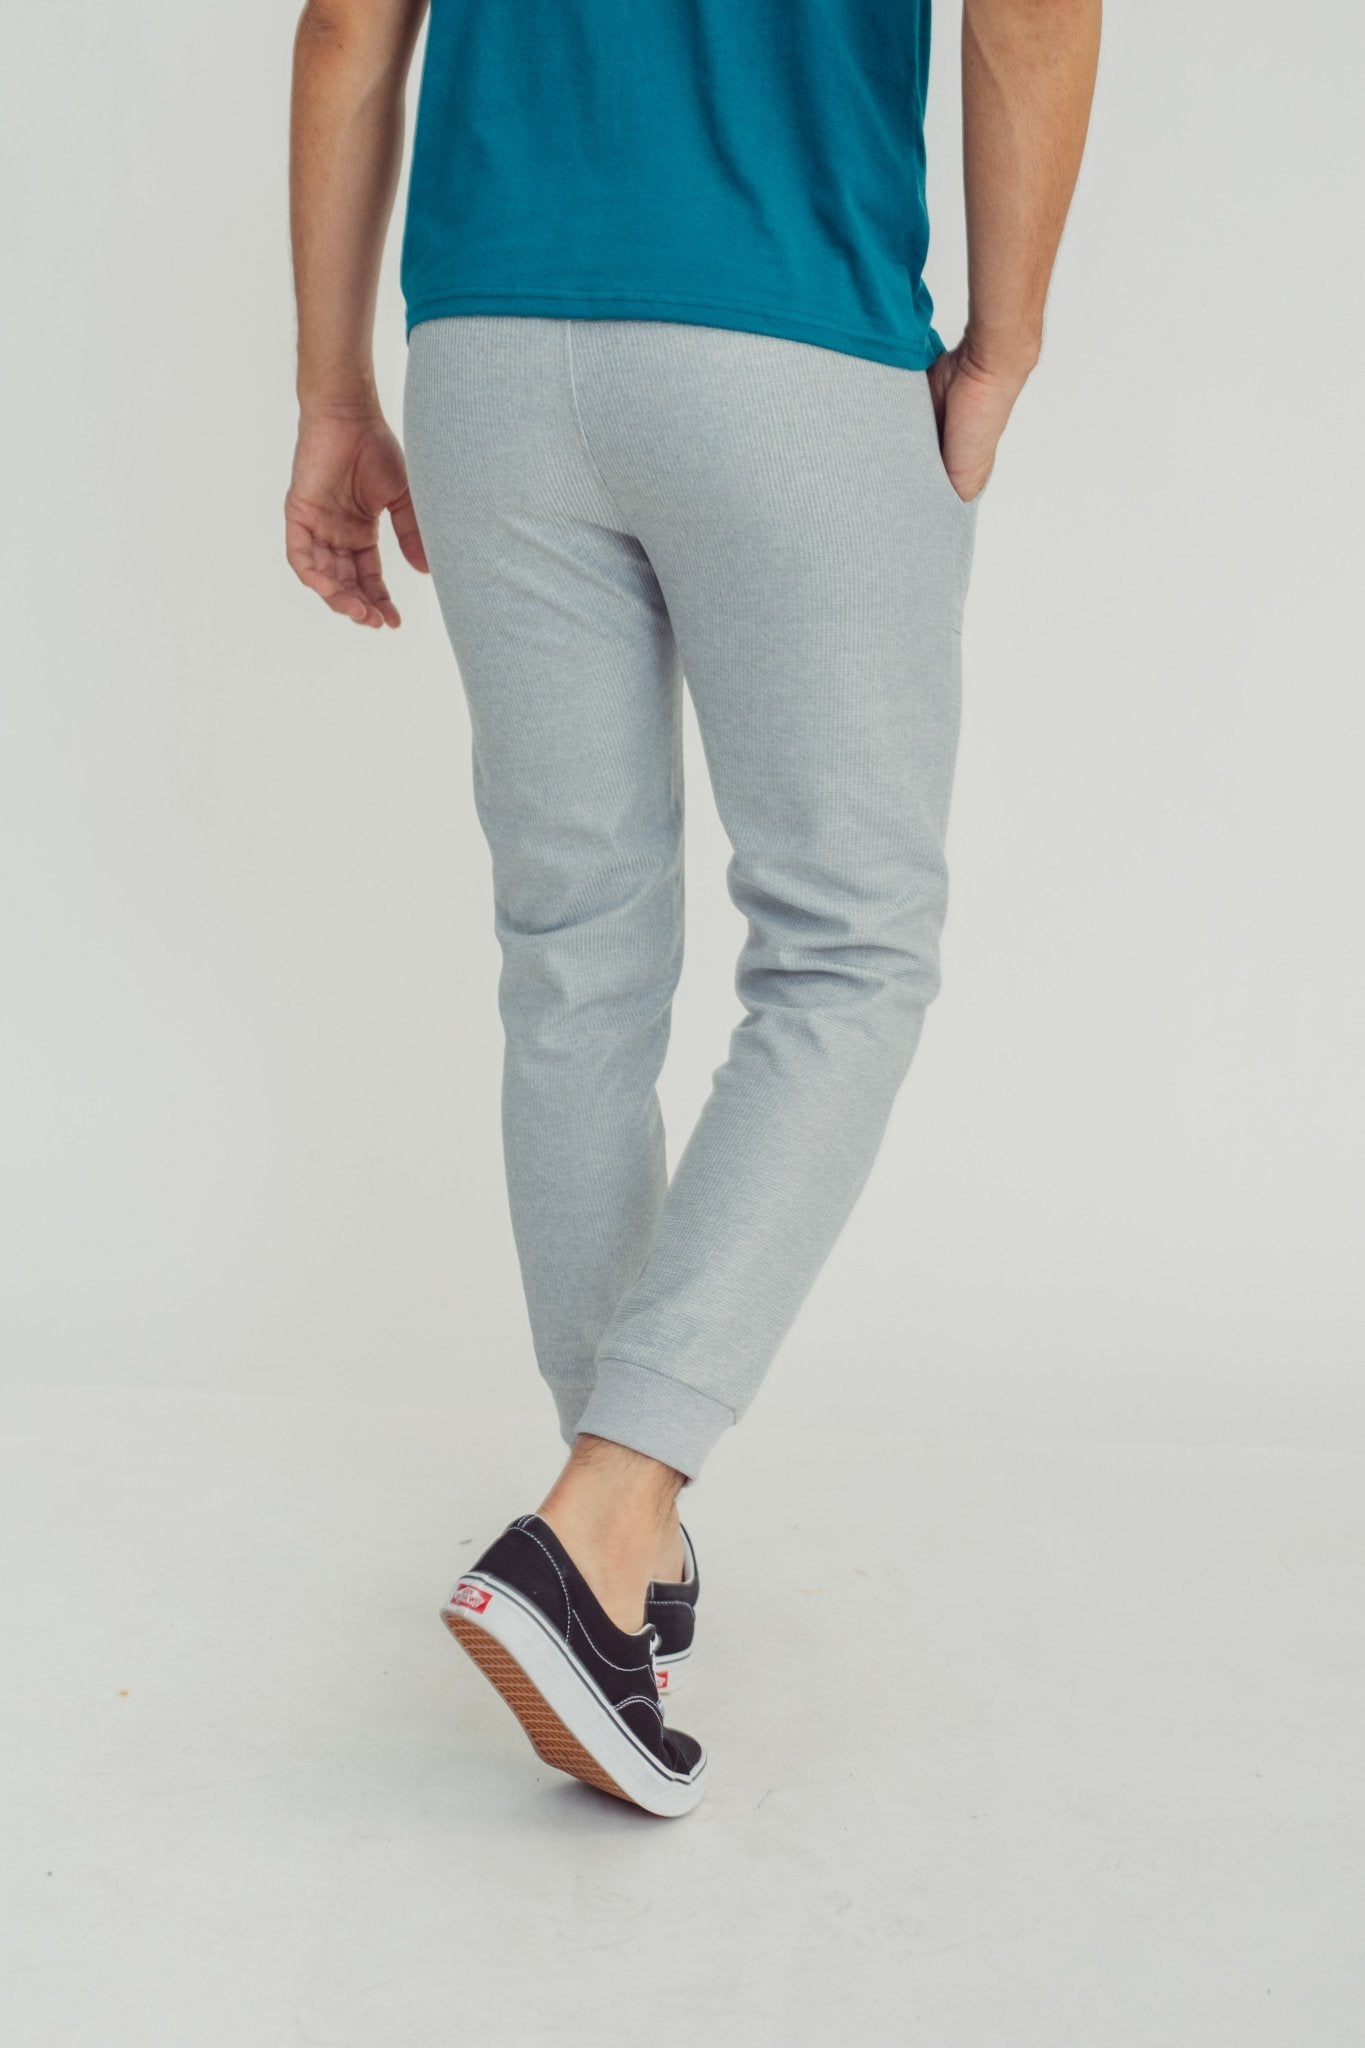 Heather Gray Jogger Pants with Large Pocket - Mossimo PH